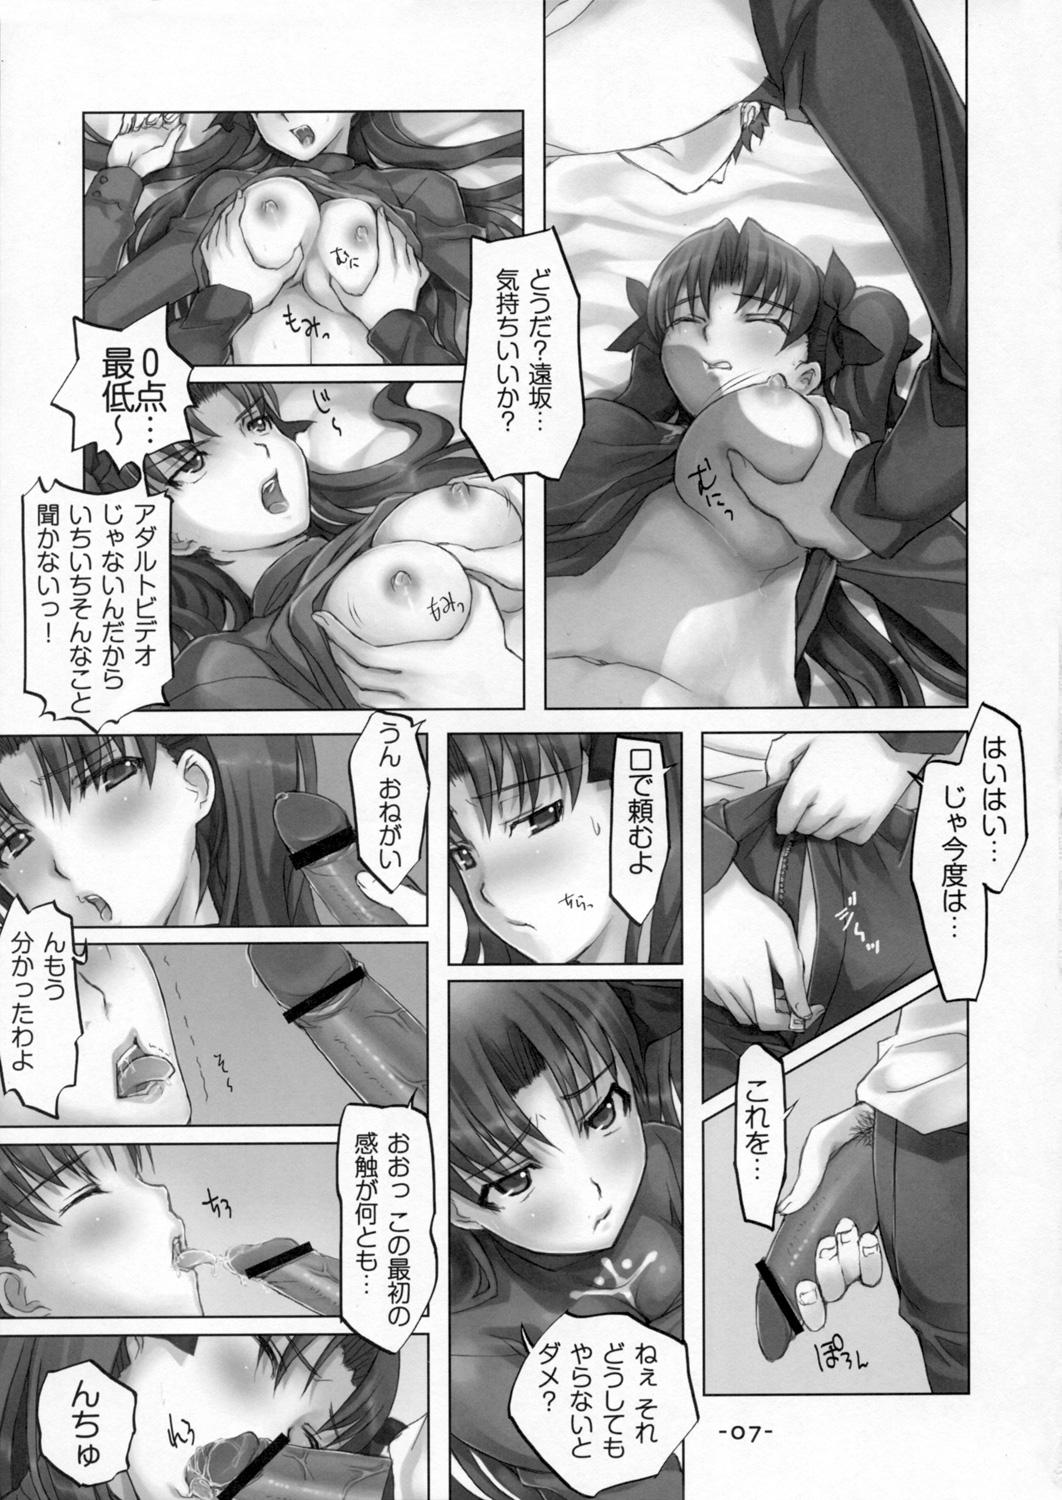 Denmark DAILY LIFE - Fate stay night Fate hollow ataraxia Gay 3some - Page 6